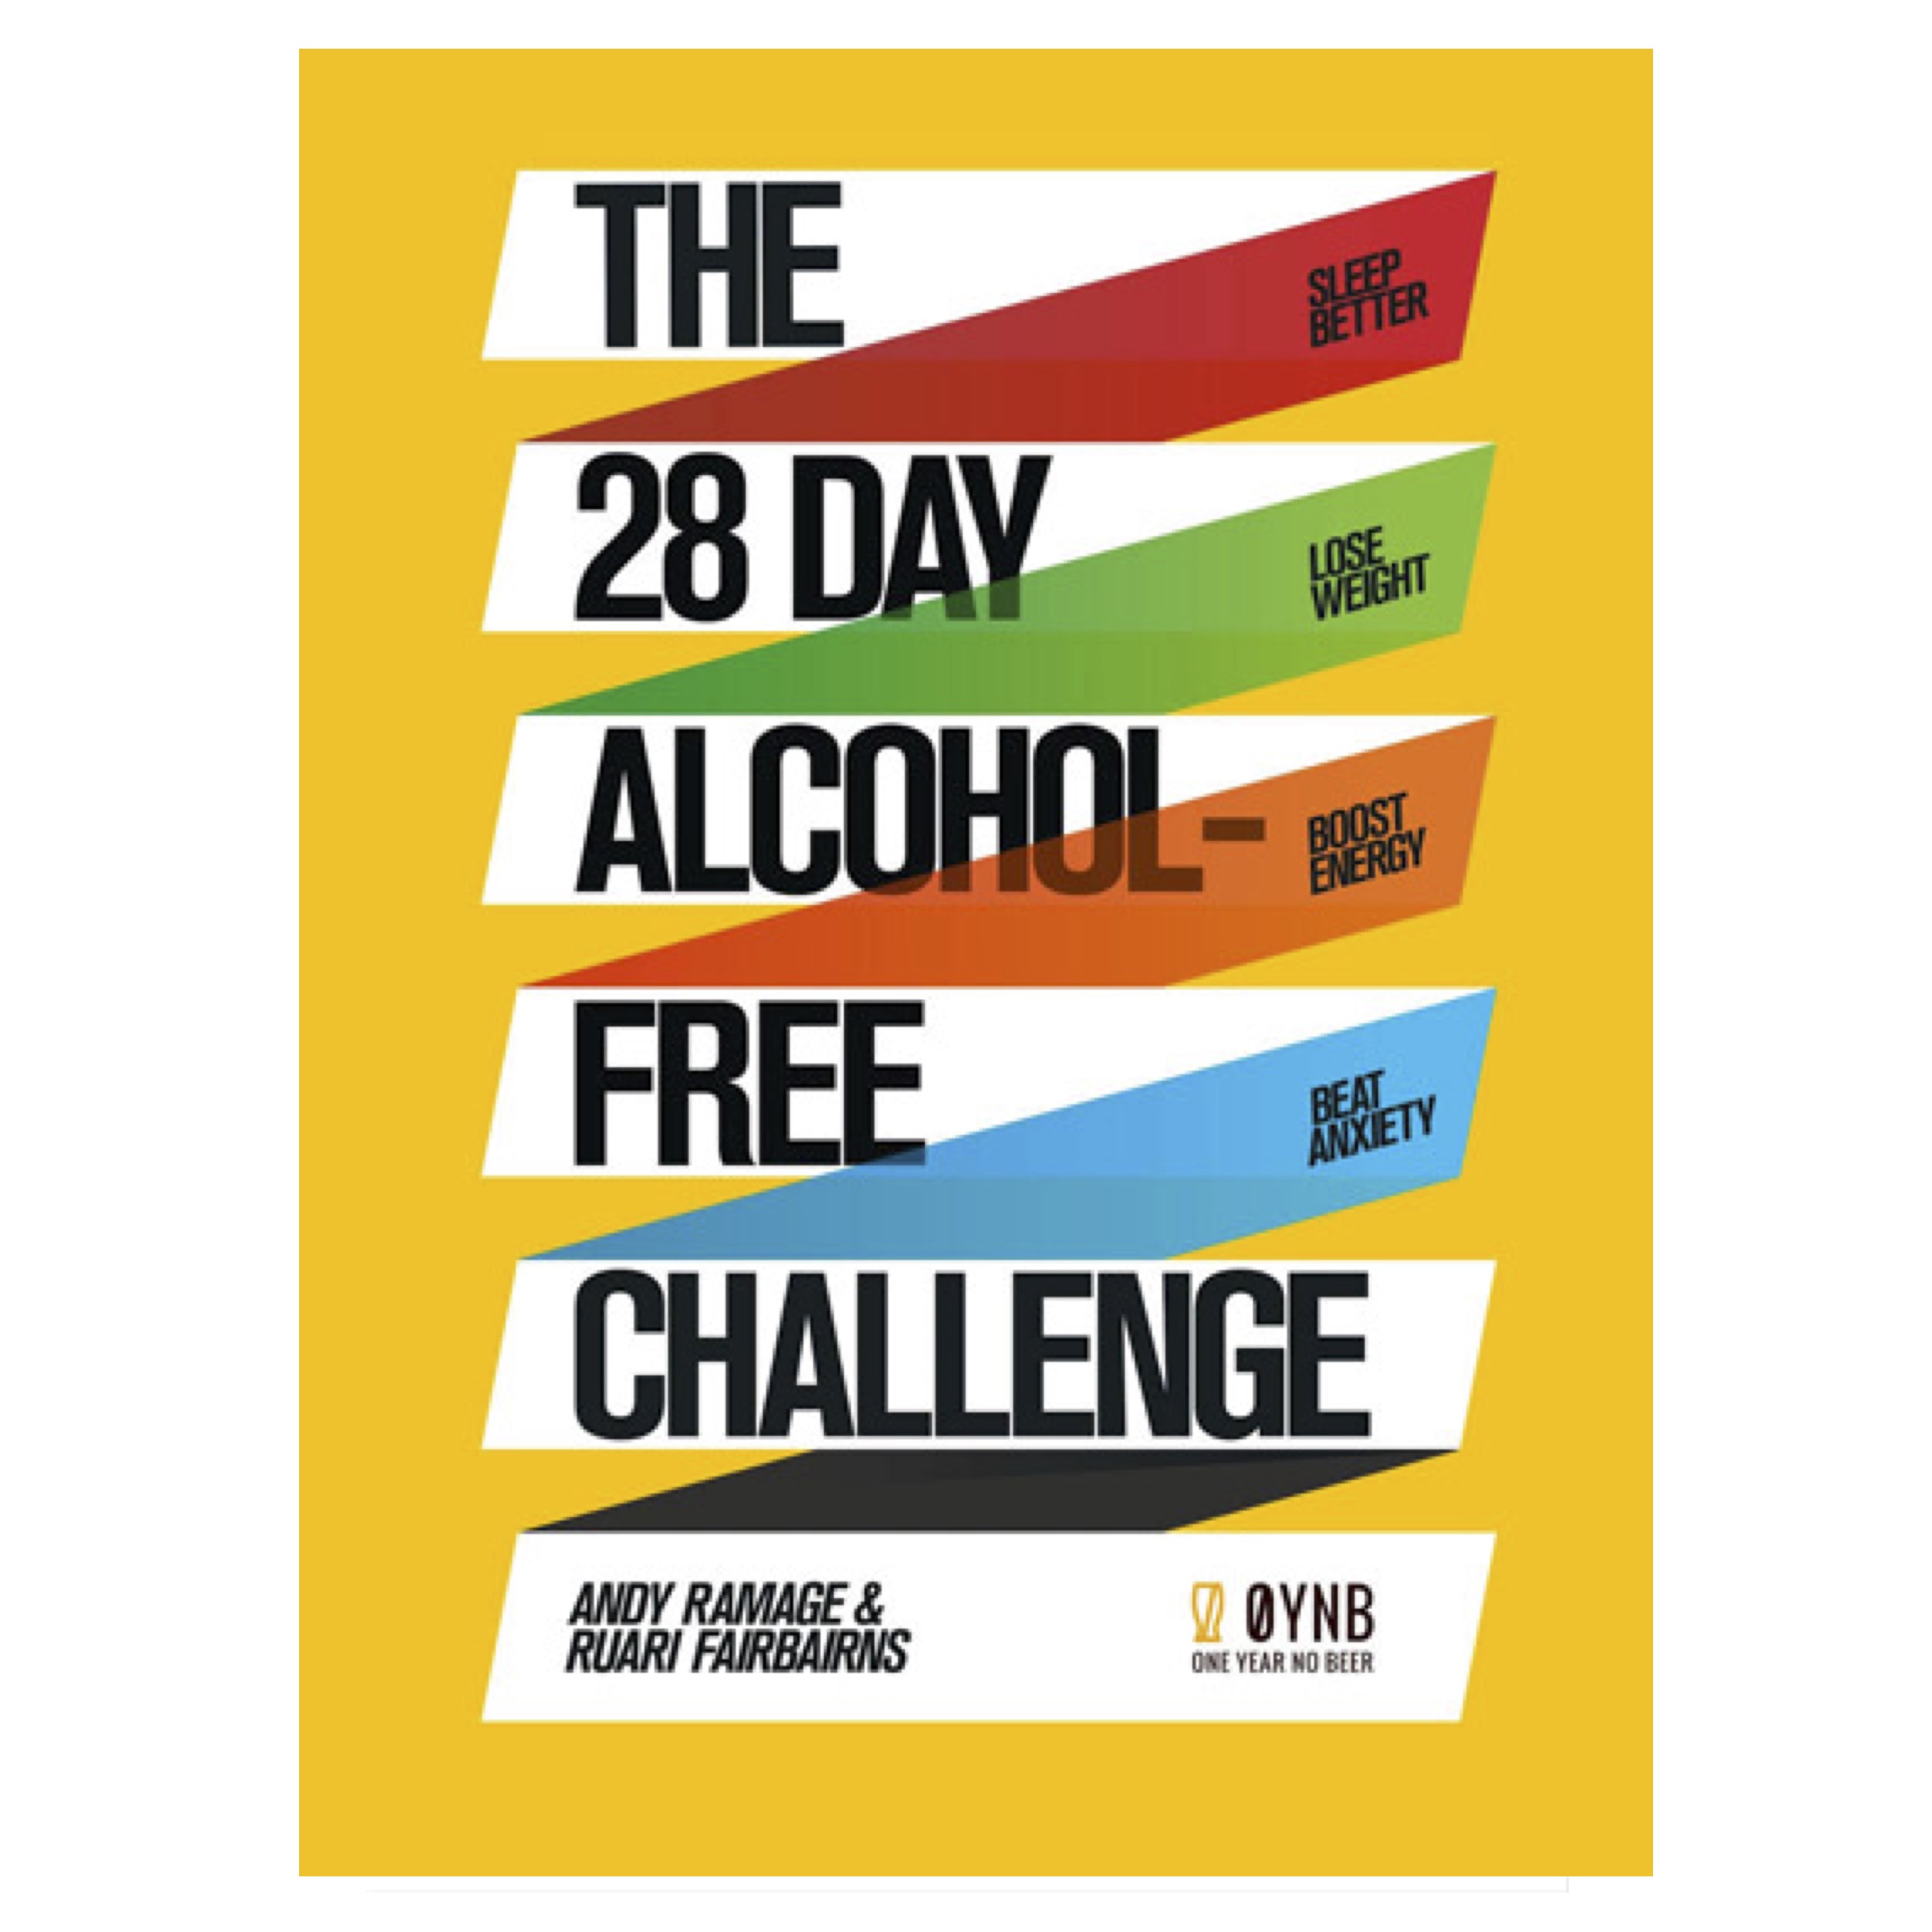 The 28 Day Alcohol-Free Challenge: Sleep Better, Lose Weight, Boost Energy, Beat Anxiety 